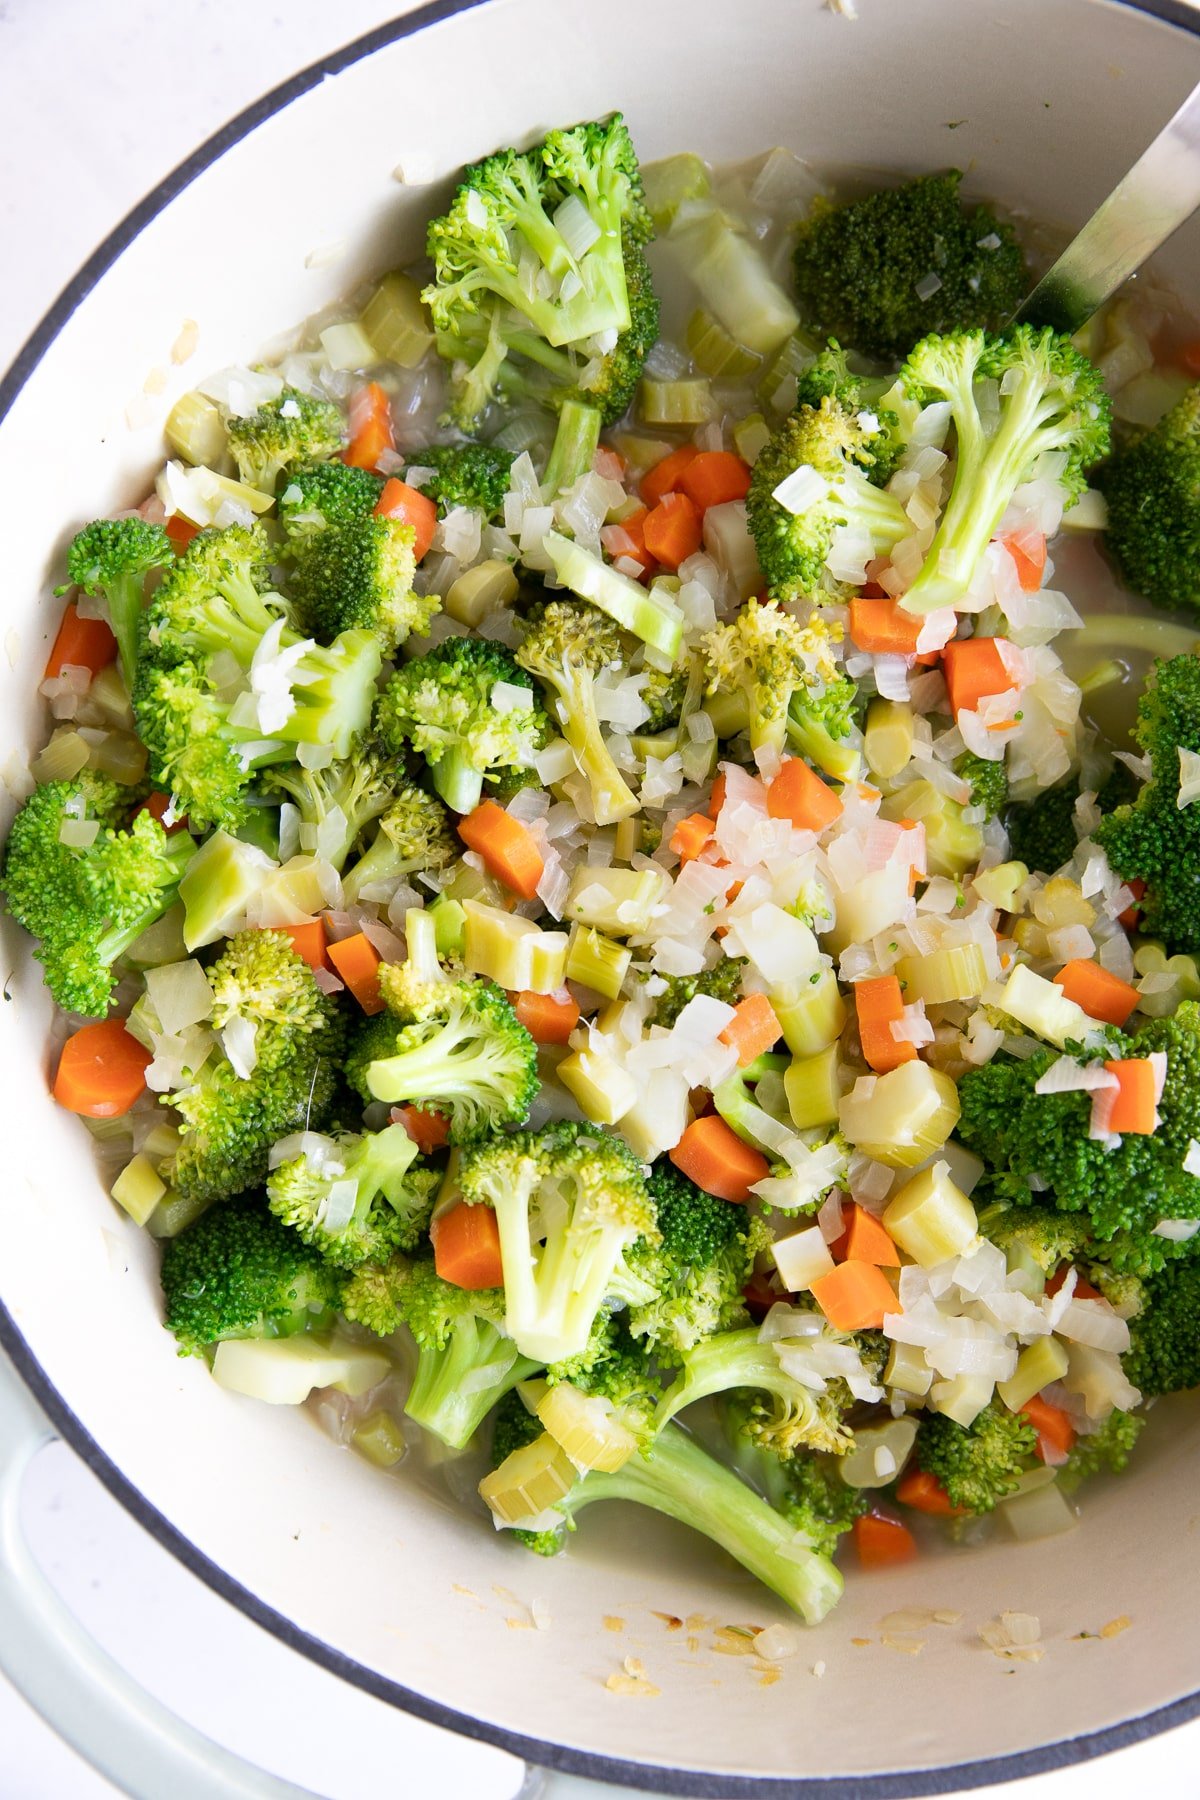 Large pot filled with softened broccoli florets, carrots, onions, and celery.